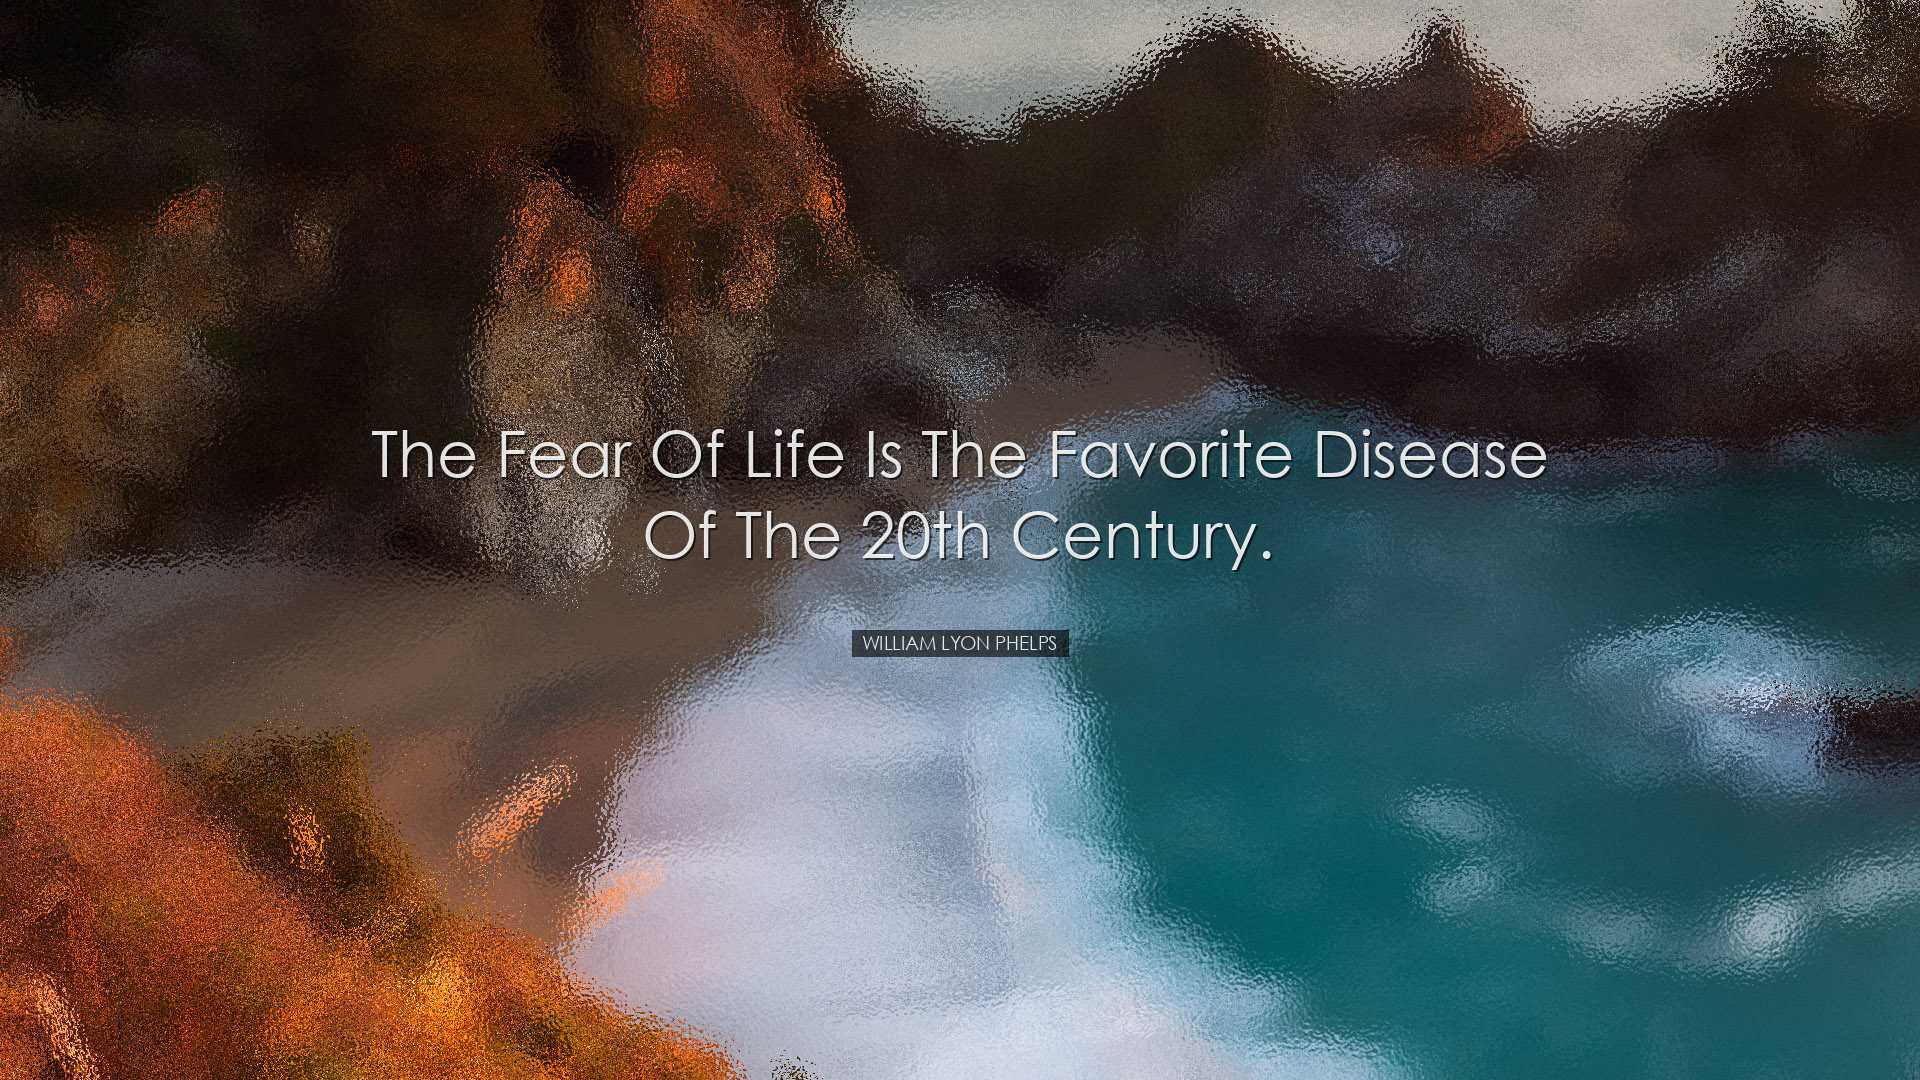 The fear of life is the favorite disease of the 20th century. - Wi